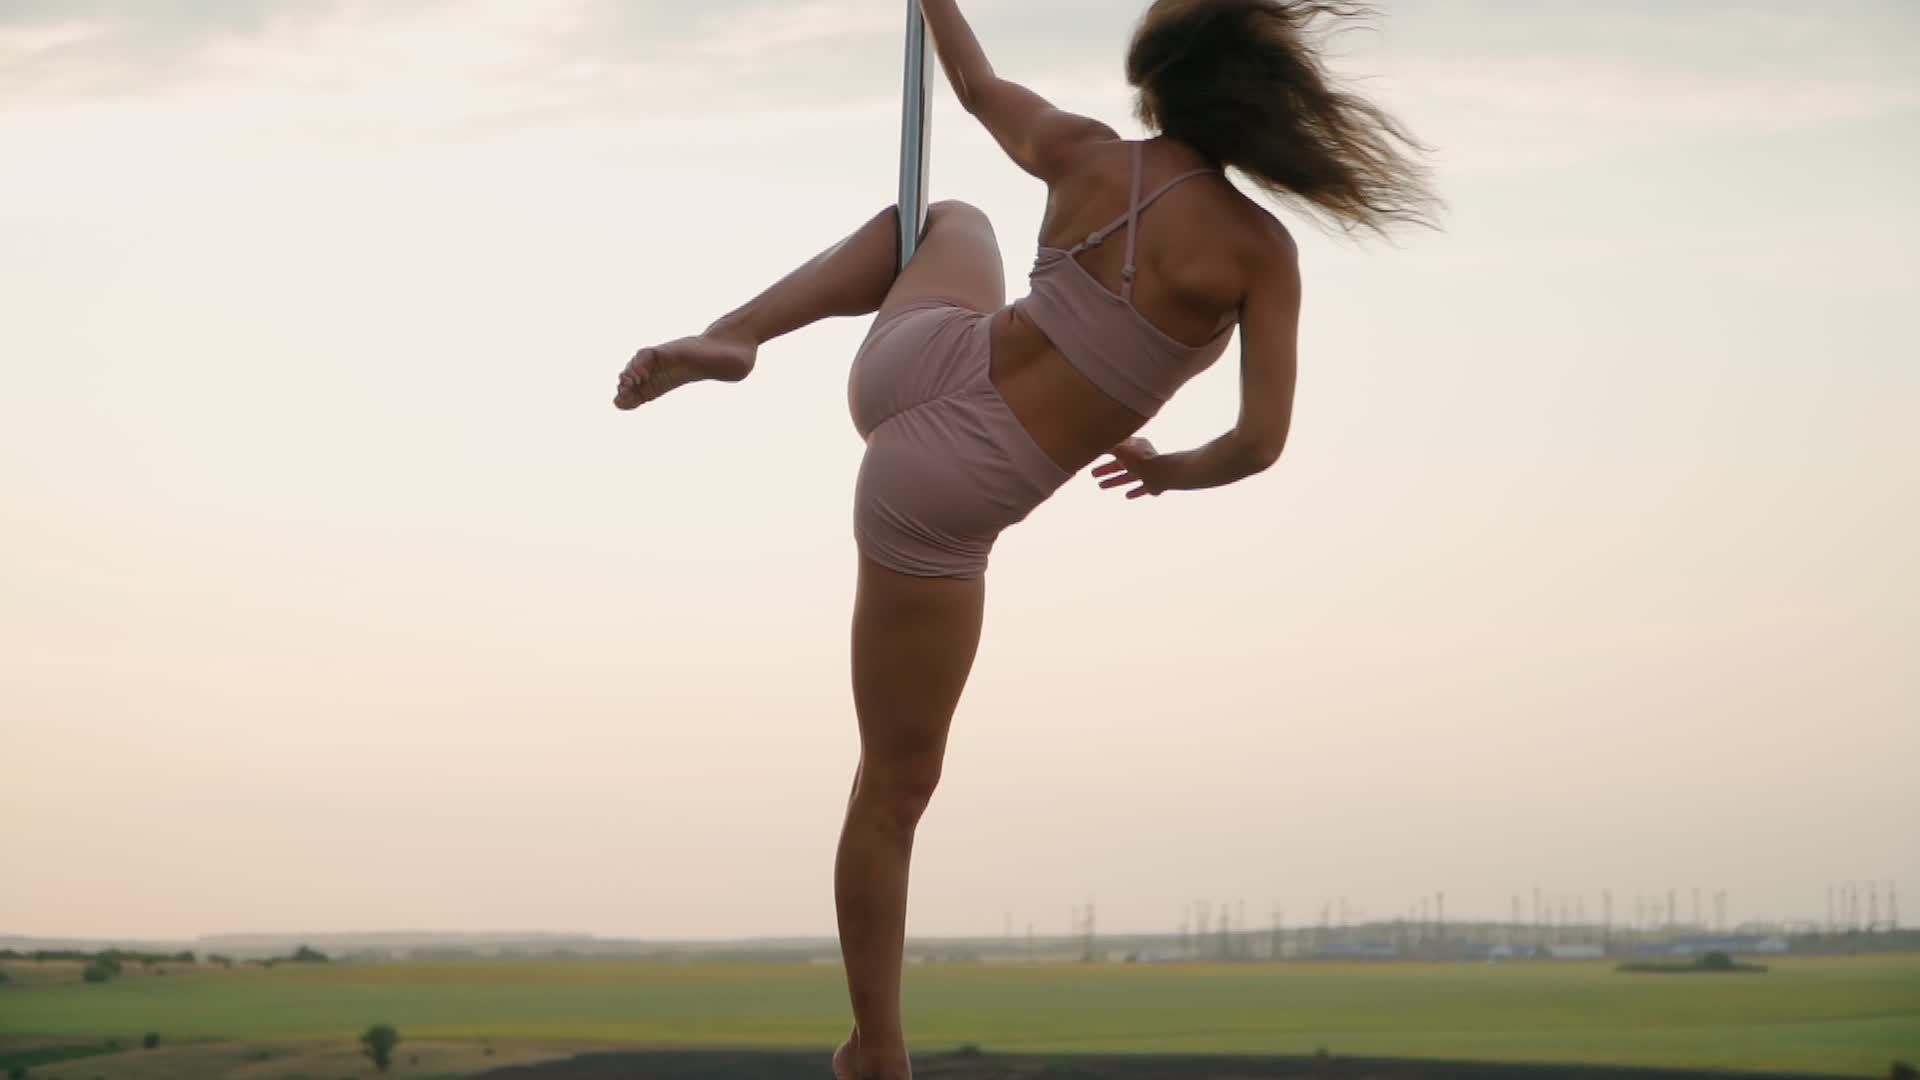 https://static.vecteezy.com/system/resources/thumbnails/012/771/723/original/beautiful-athletic-woman-performs-tricks-on-the-pole-against-the-background-of-sunset-in-the-field-beauty-and-body-care-female-sports-and-fitness-slow-motion-video.jpg